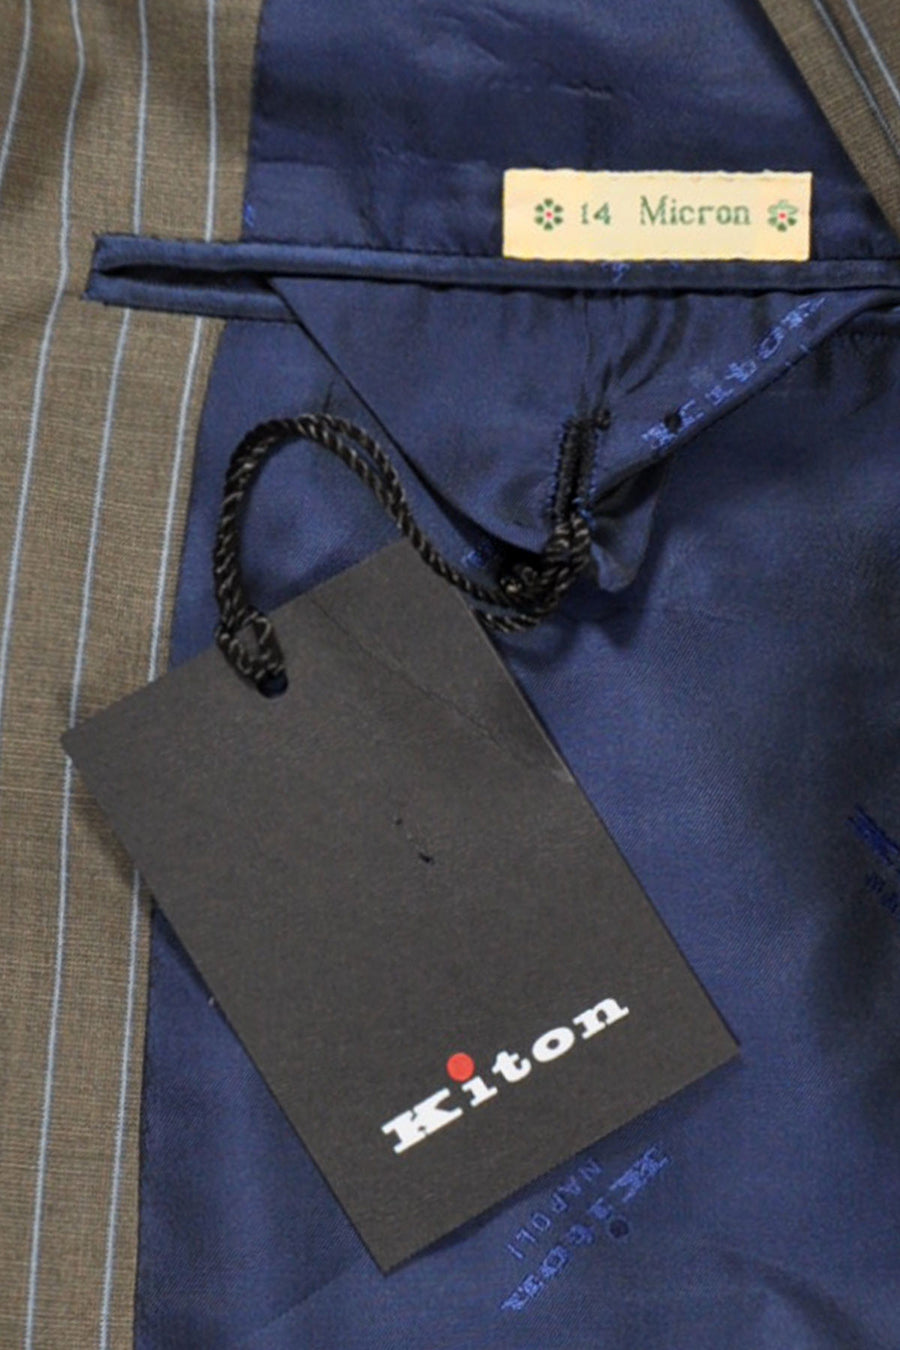 Bespoke Suits Outlet, Kiton Suit, Tom Ford, Borrelli Sport Coat Tagged ...